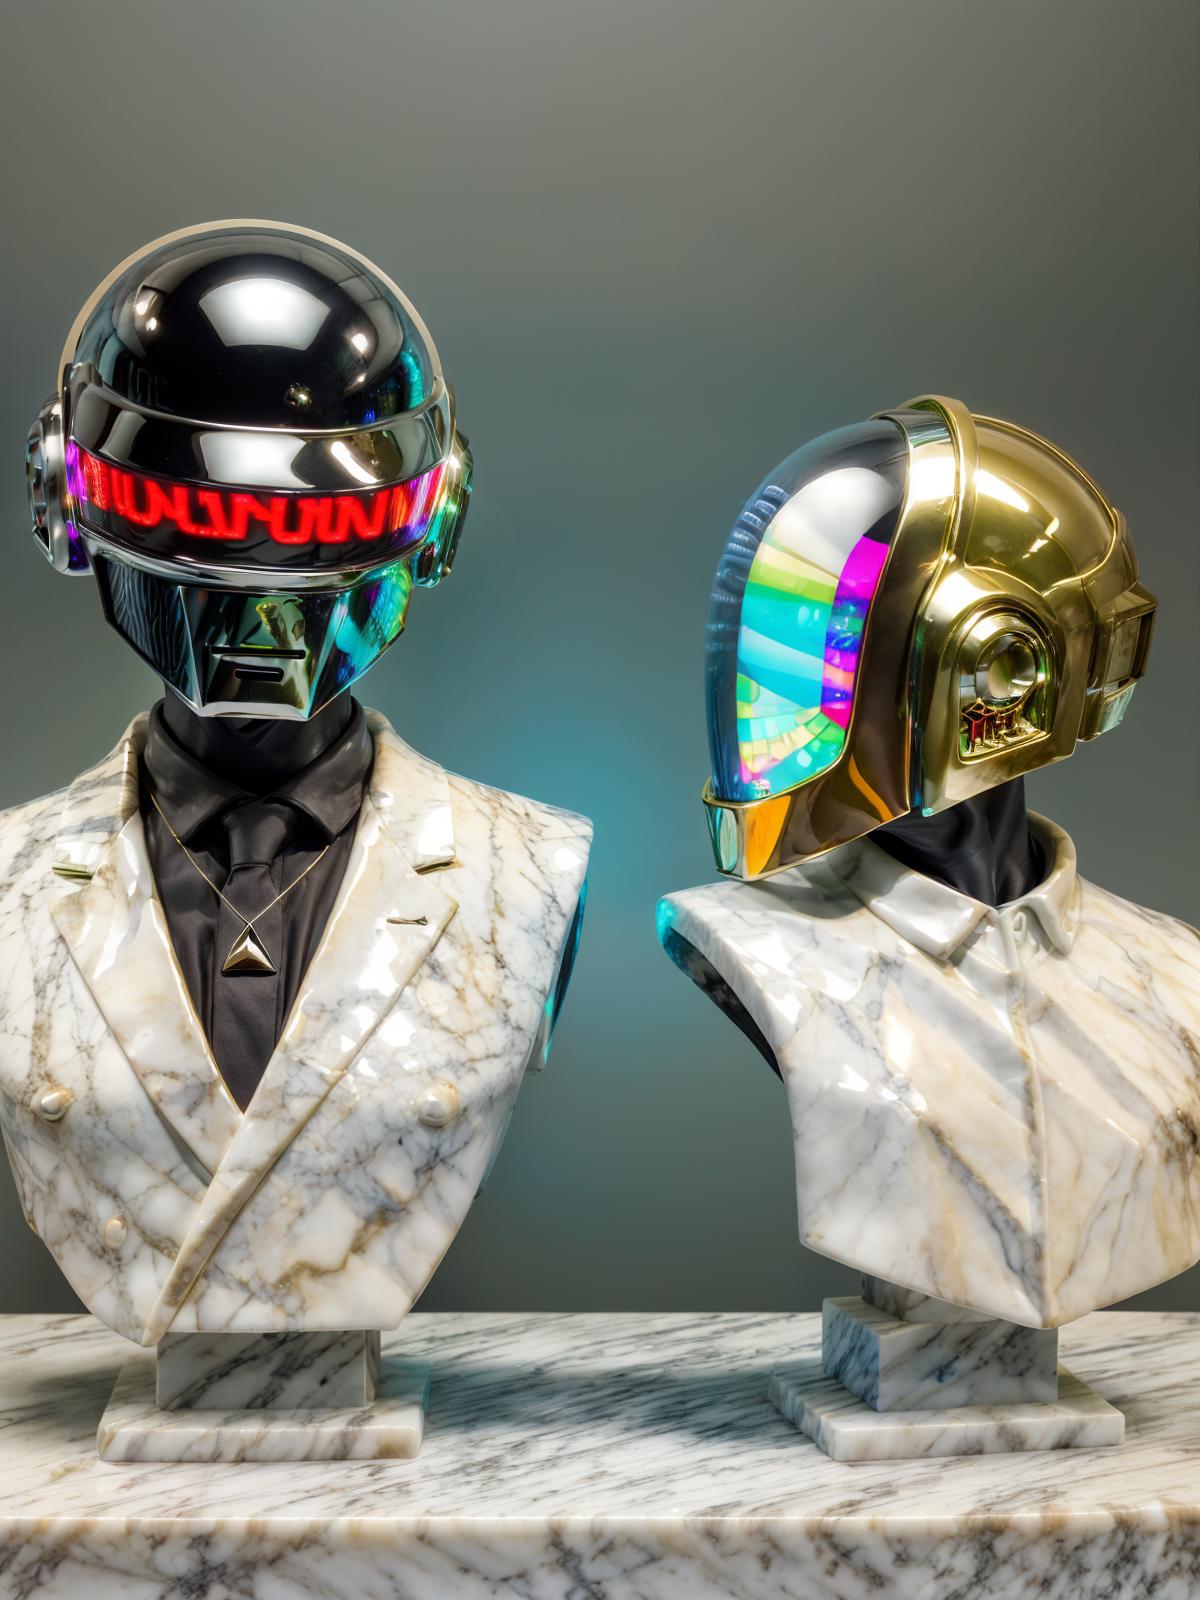 Daft Punk image by diffusiondesign